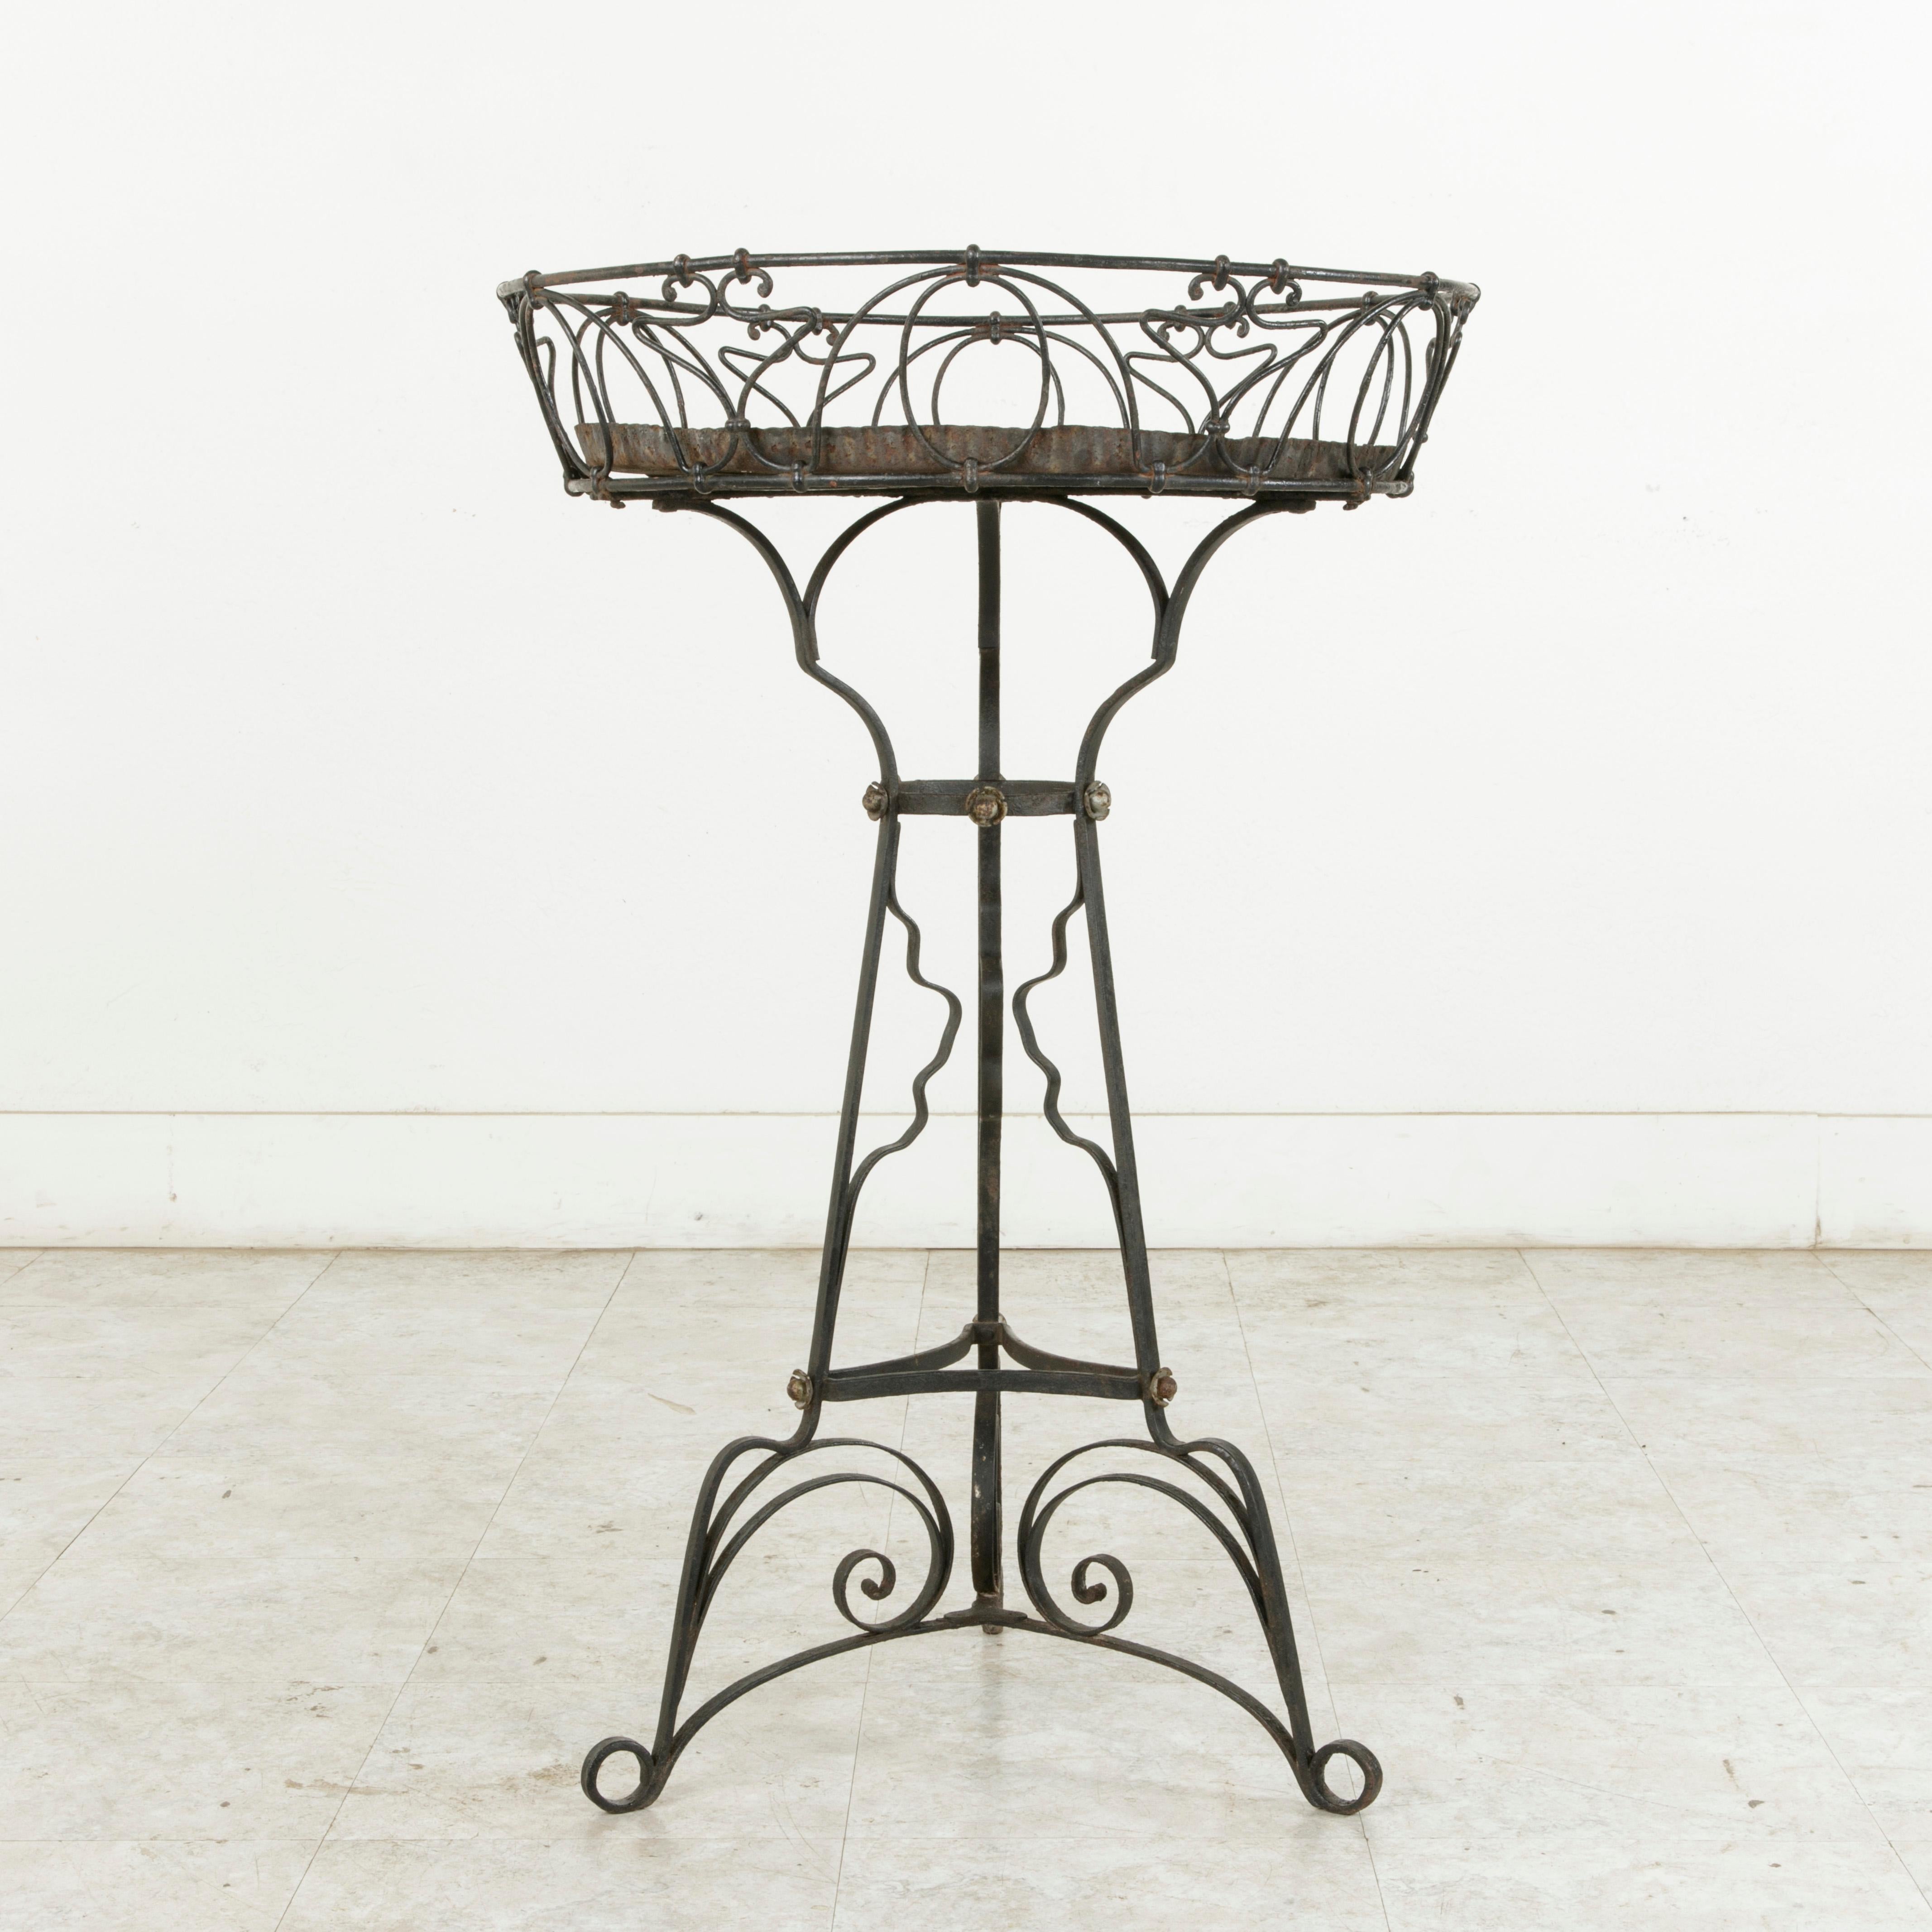 Early 20th Century French Art Nouveau Period Iron Planter or Jardiniere, circa 1900 For Sale